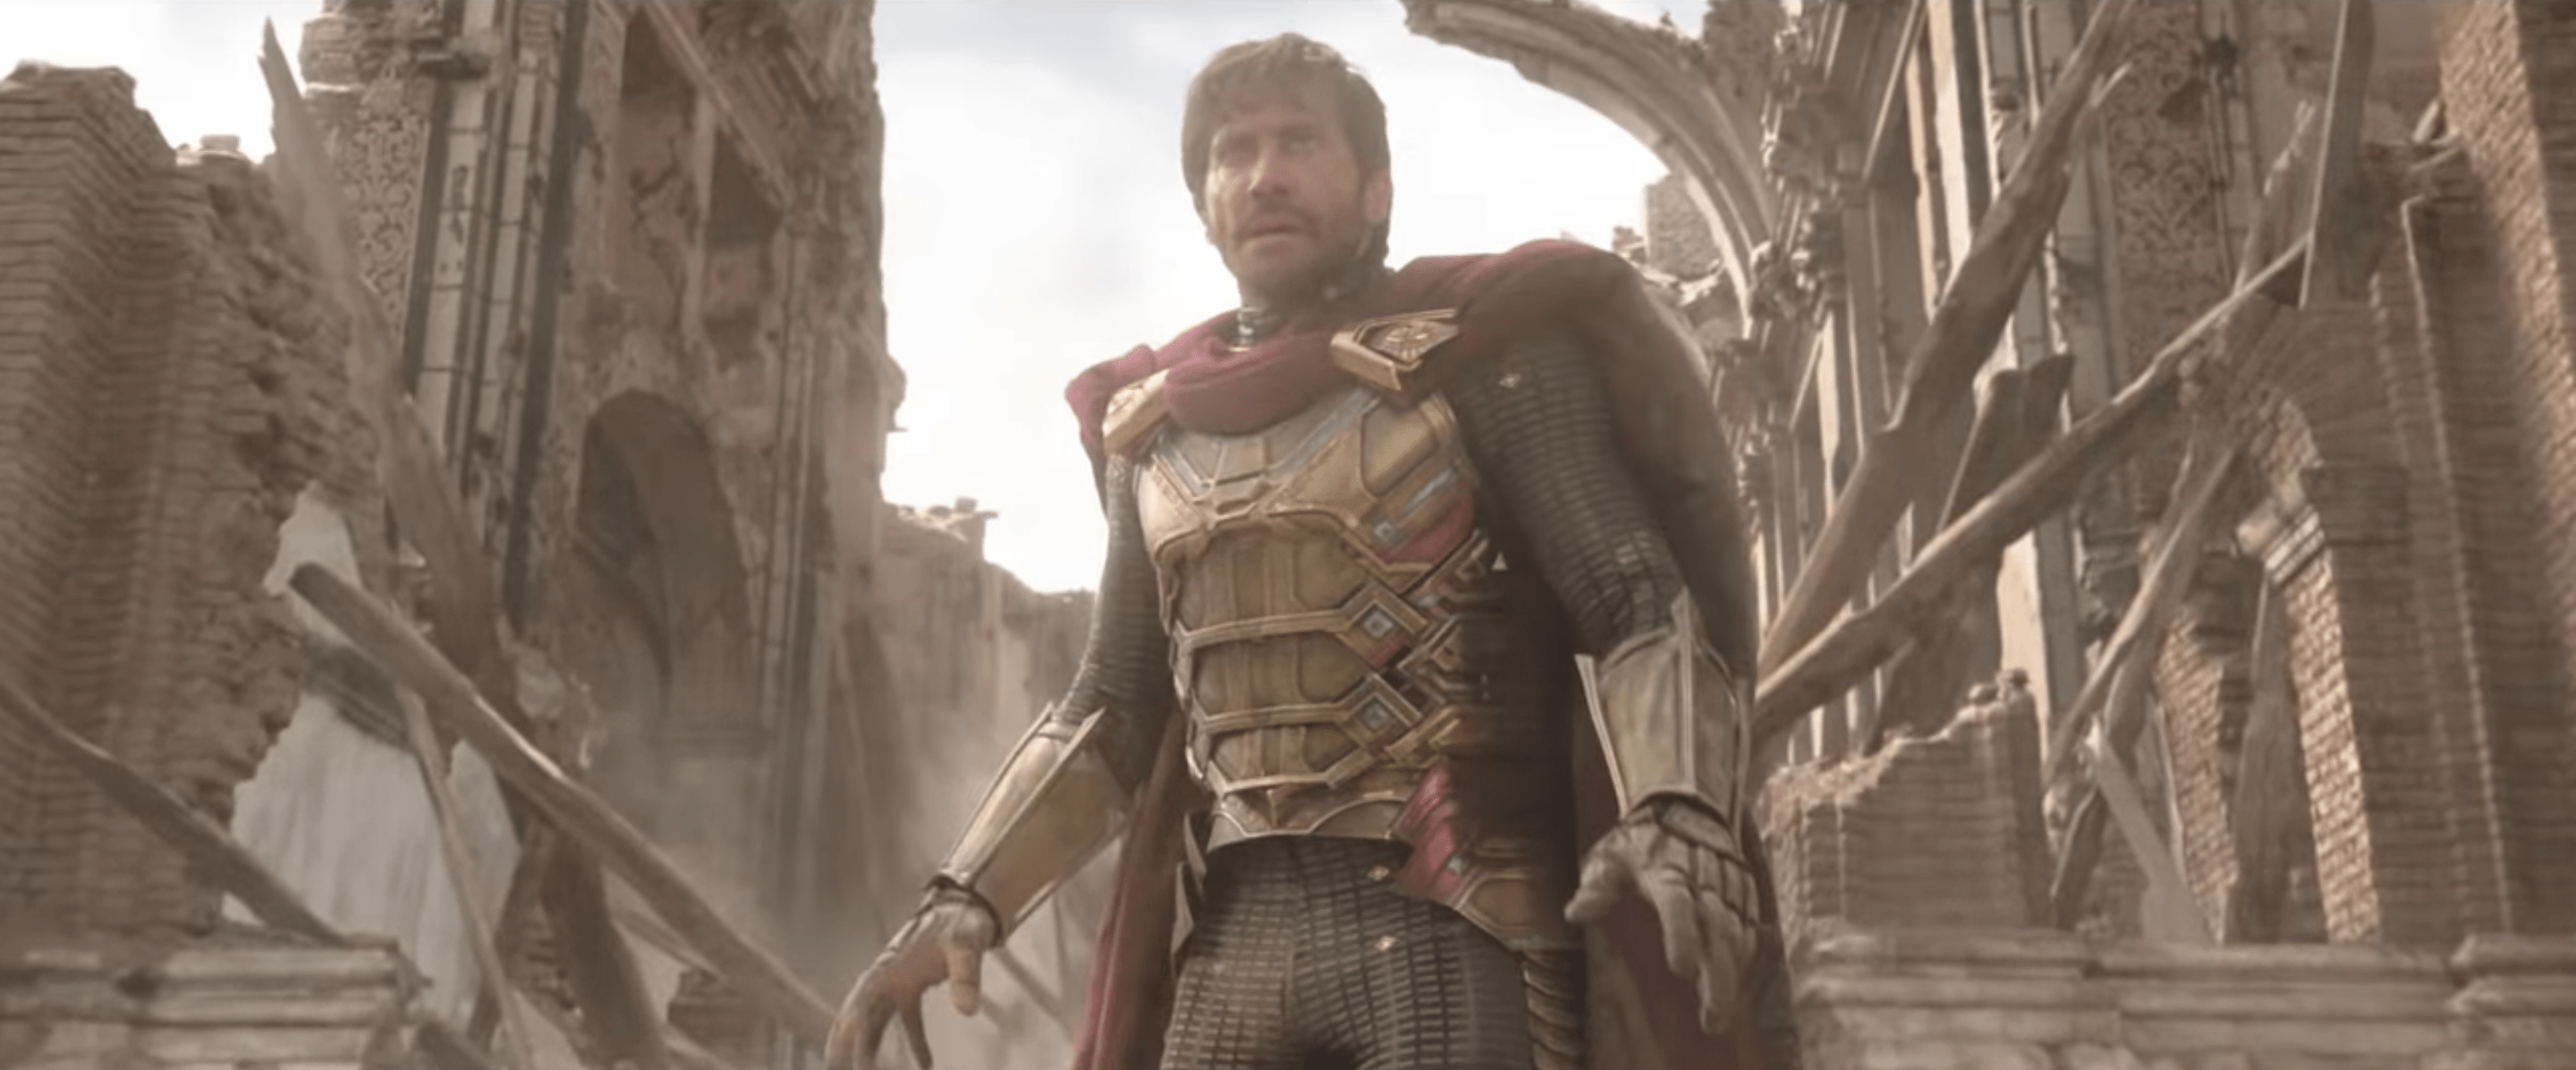 Spider-Man: Far From Home will feature Jake Gyllenhaal as Mysterio, the film's primary villain.